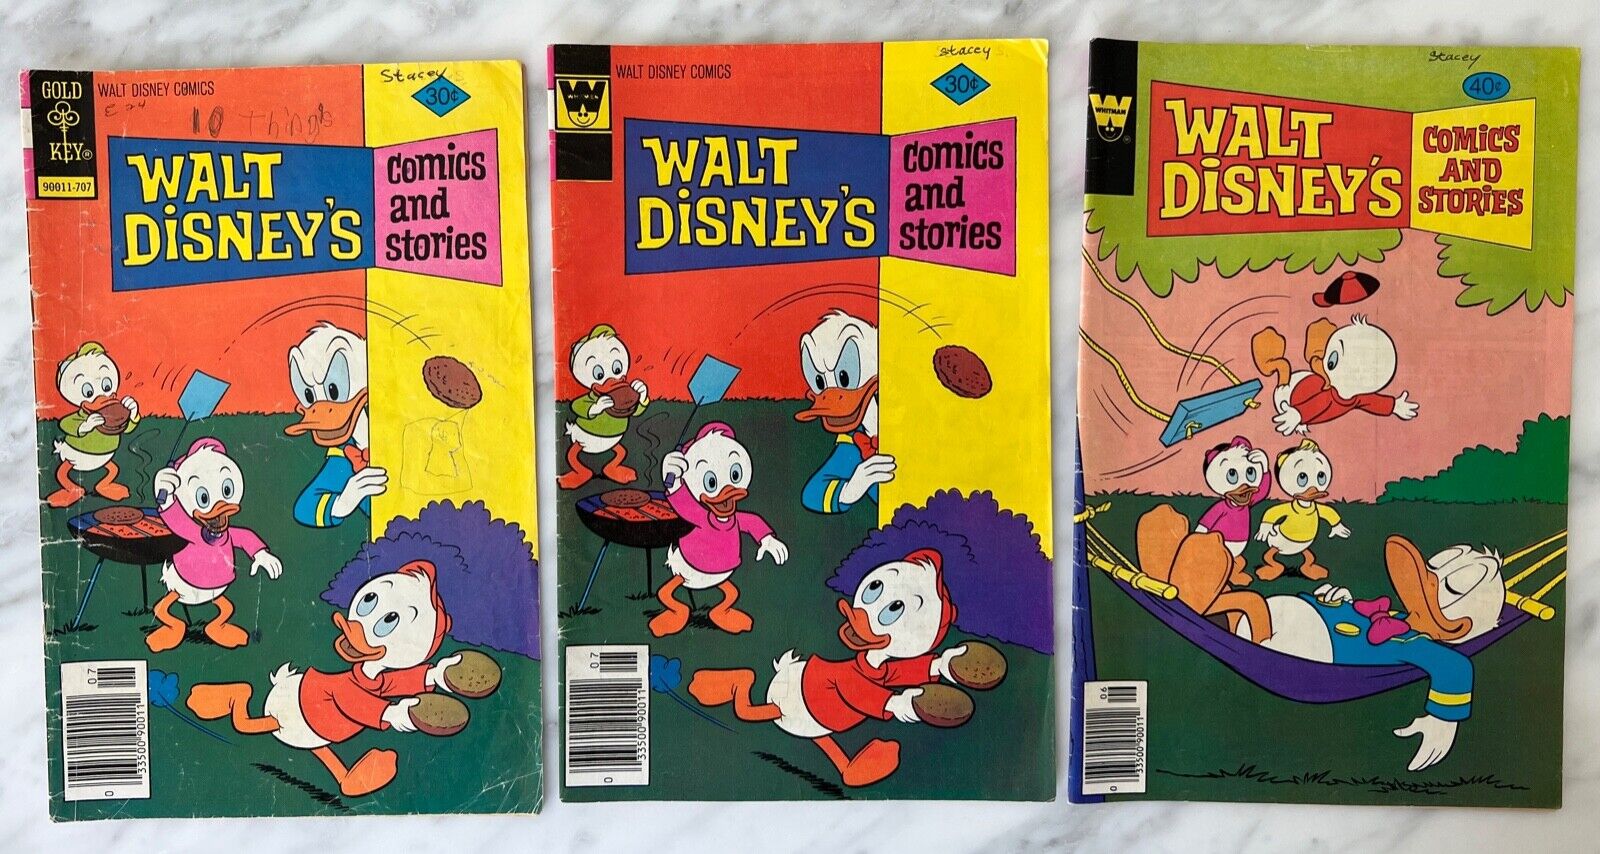 1977/1979 lot of 3 Walt Disney's Comics and Other Stories no 37, 37, 39